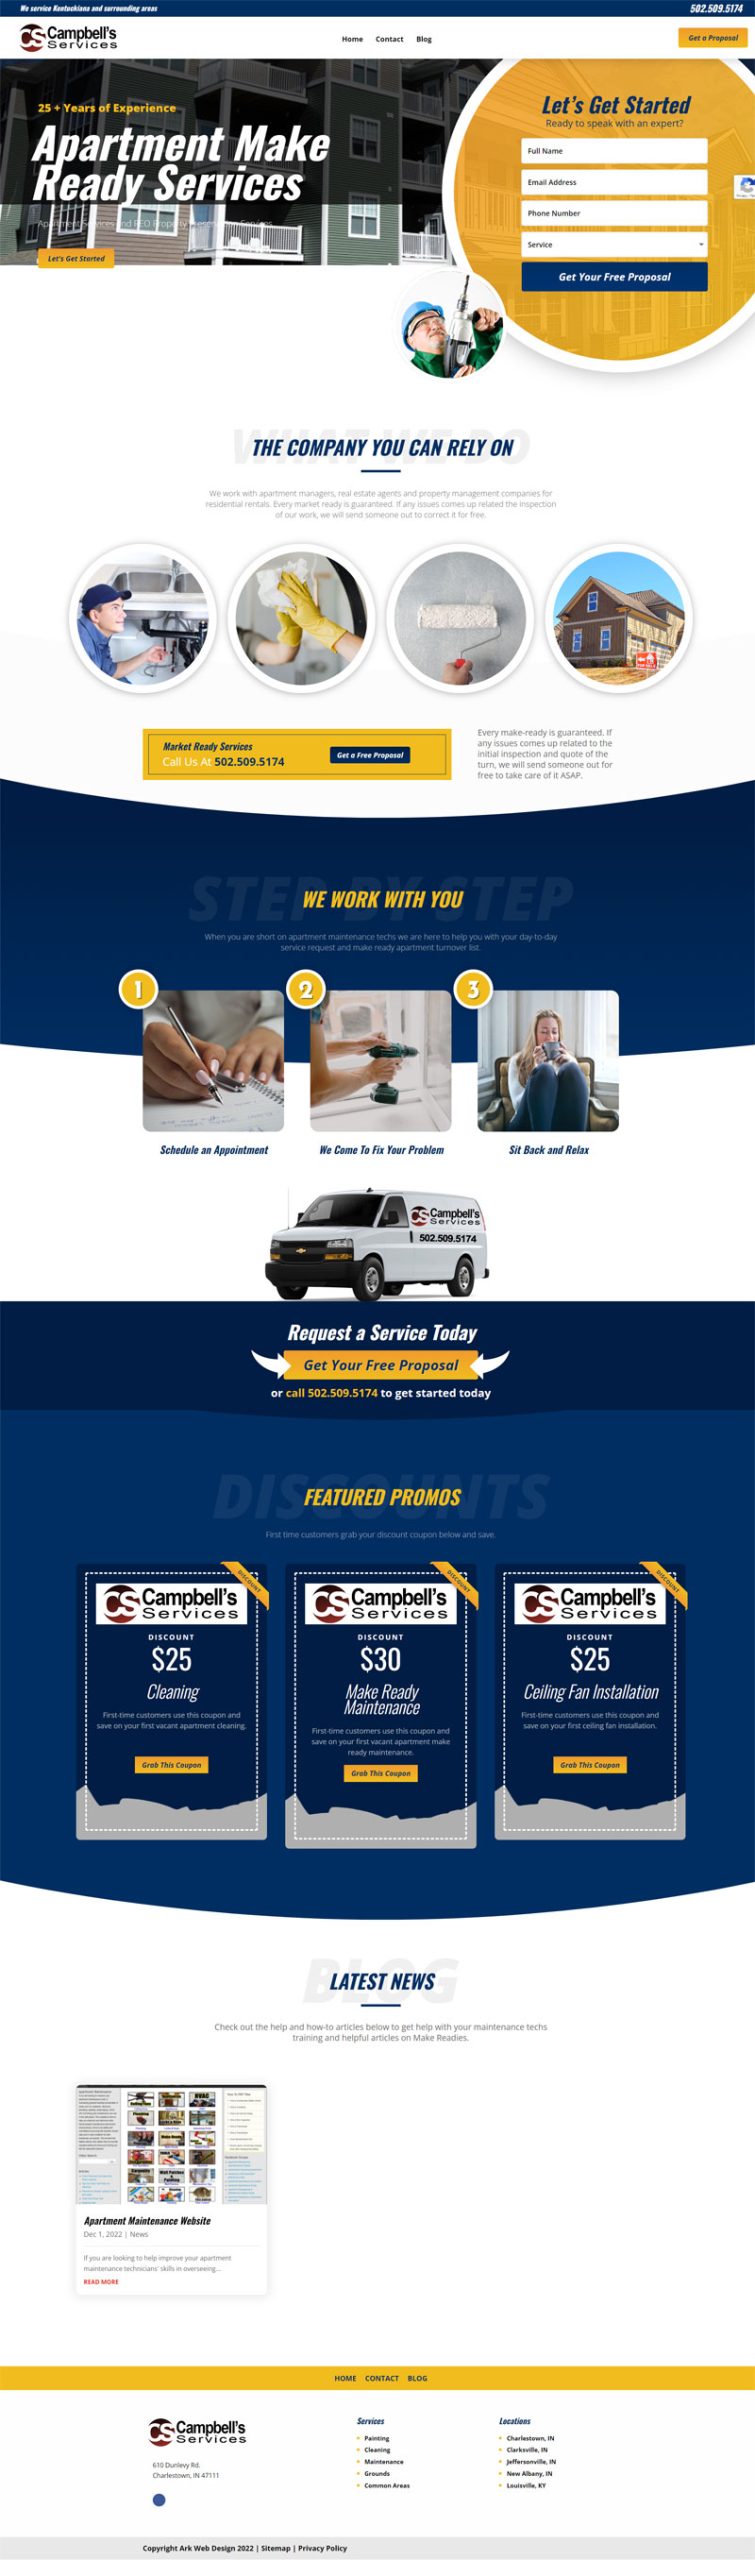 Campbell's Services Website Layout